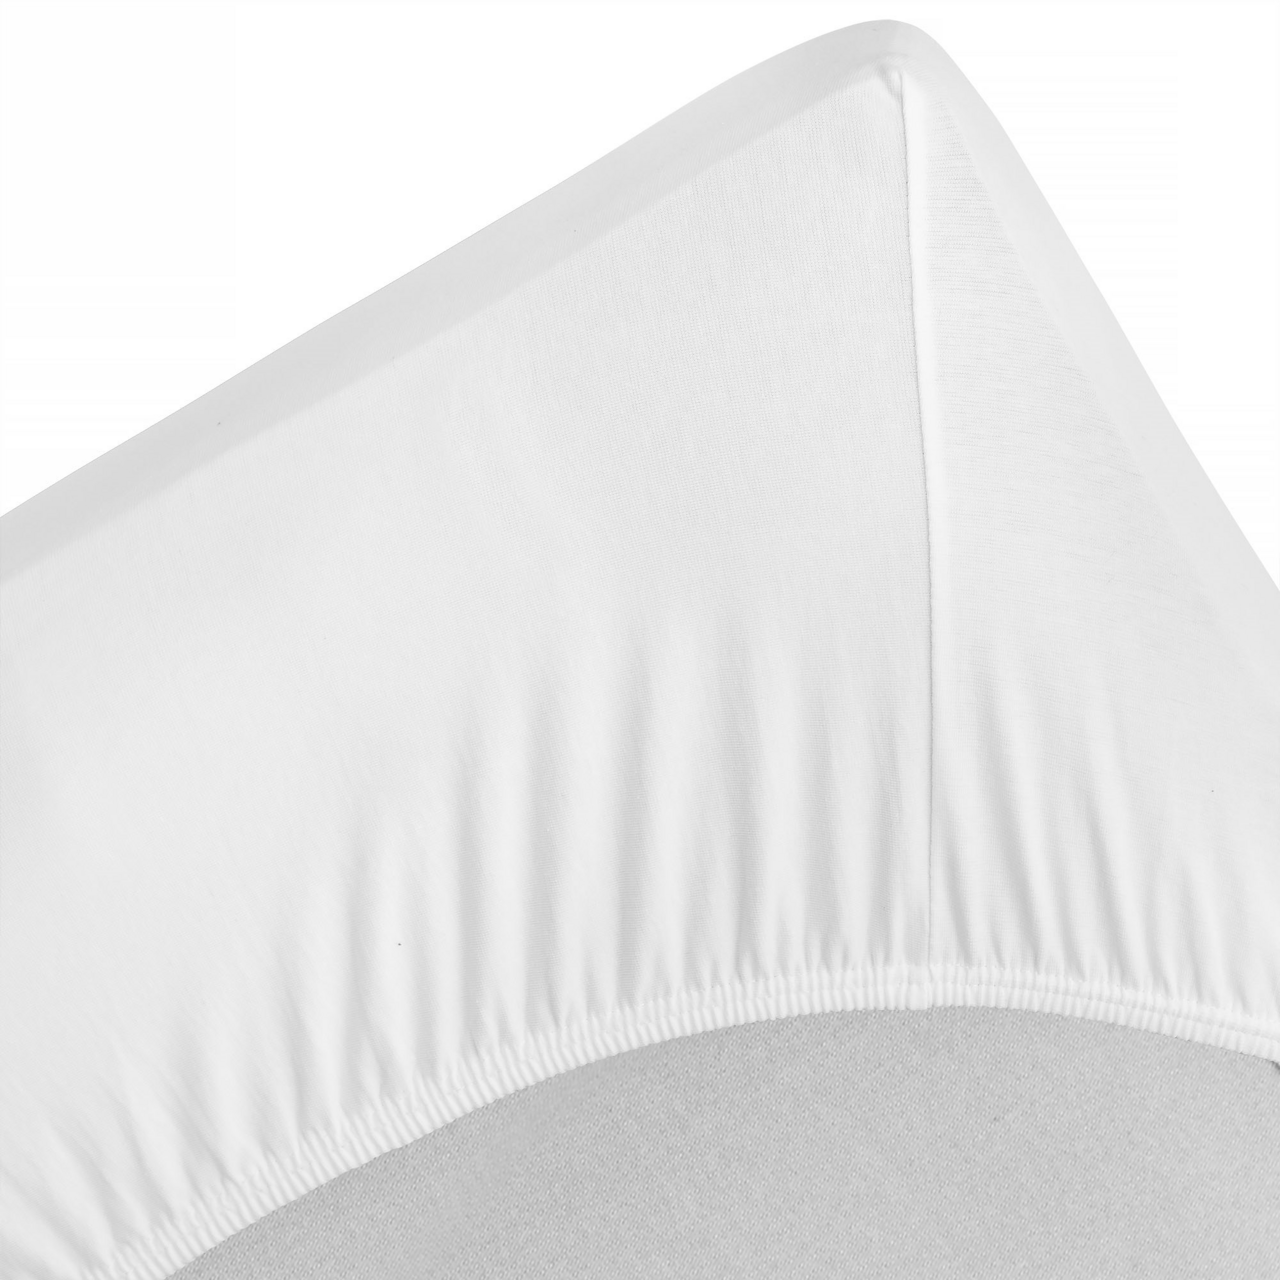 Mattress cover, fitted sheet 105x200 cm white